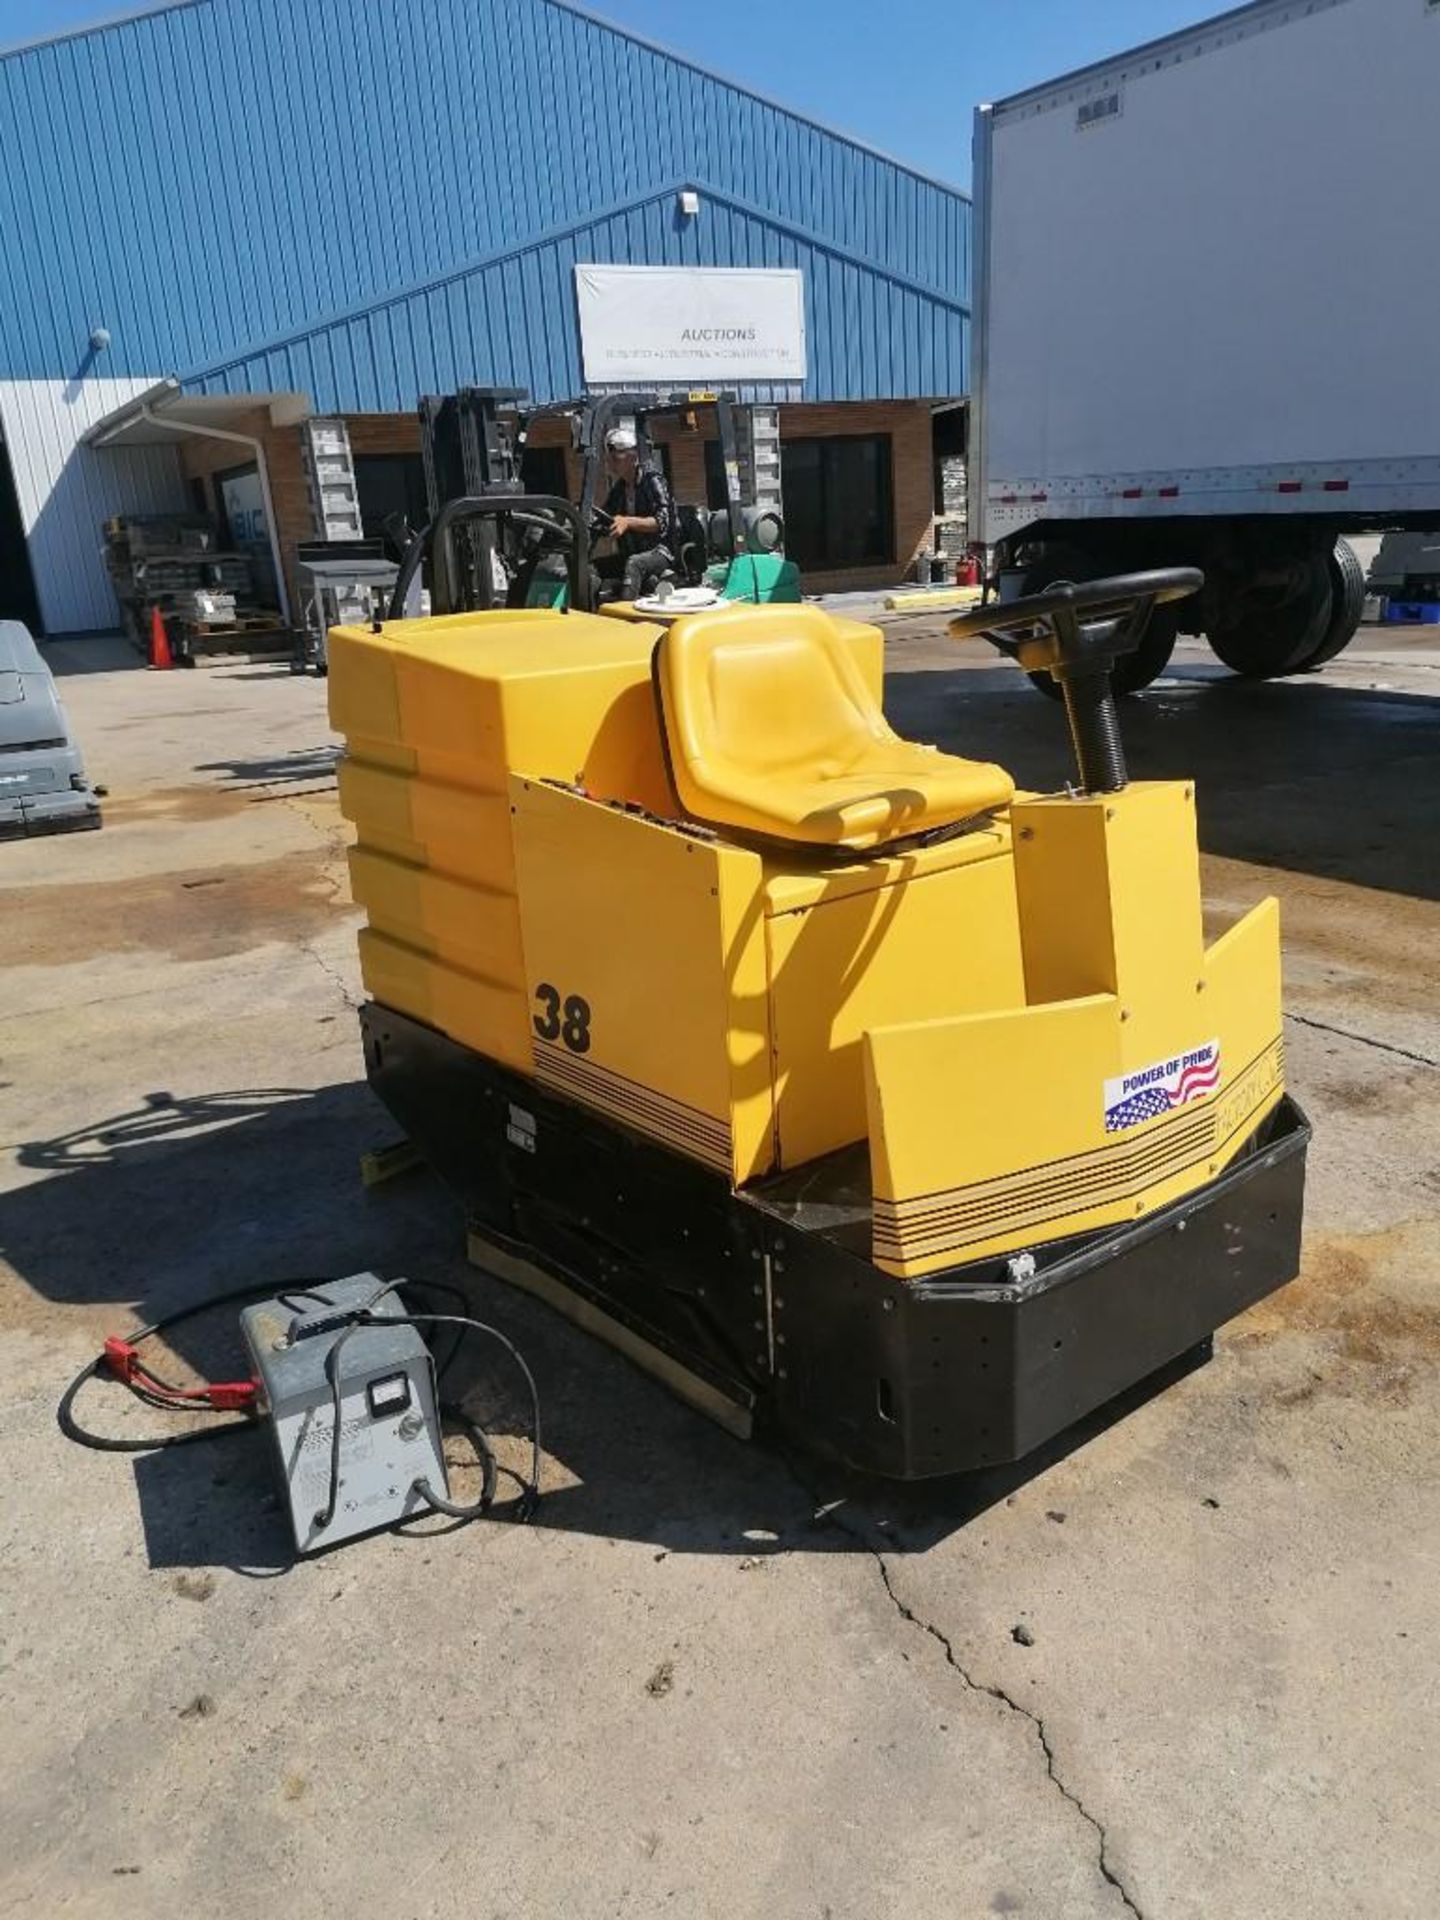 Factory Cat 38 Industrial Sweeper, Serial #JR38-2013, 2059 Hours, Model 38, with R.P.S Corporation